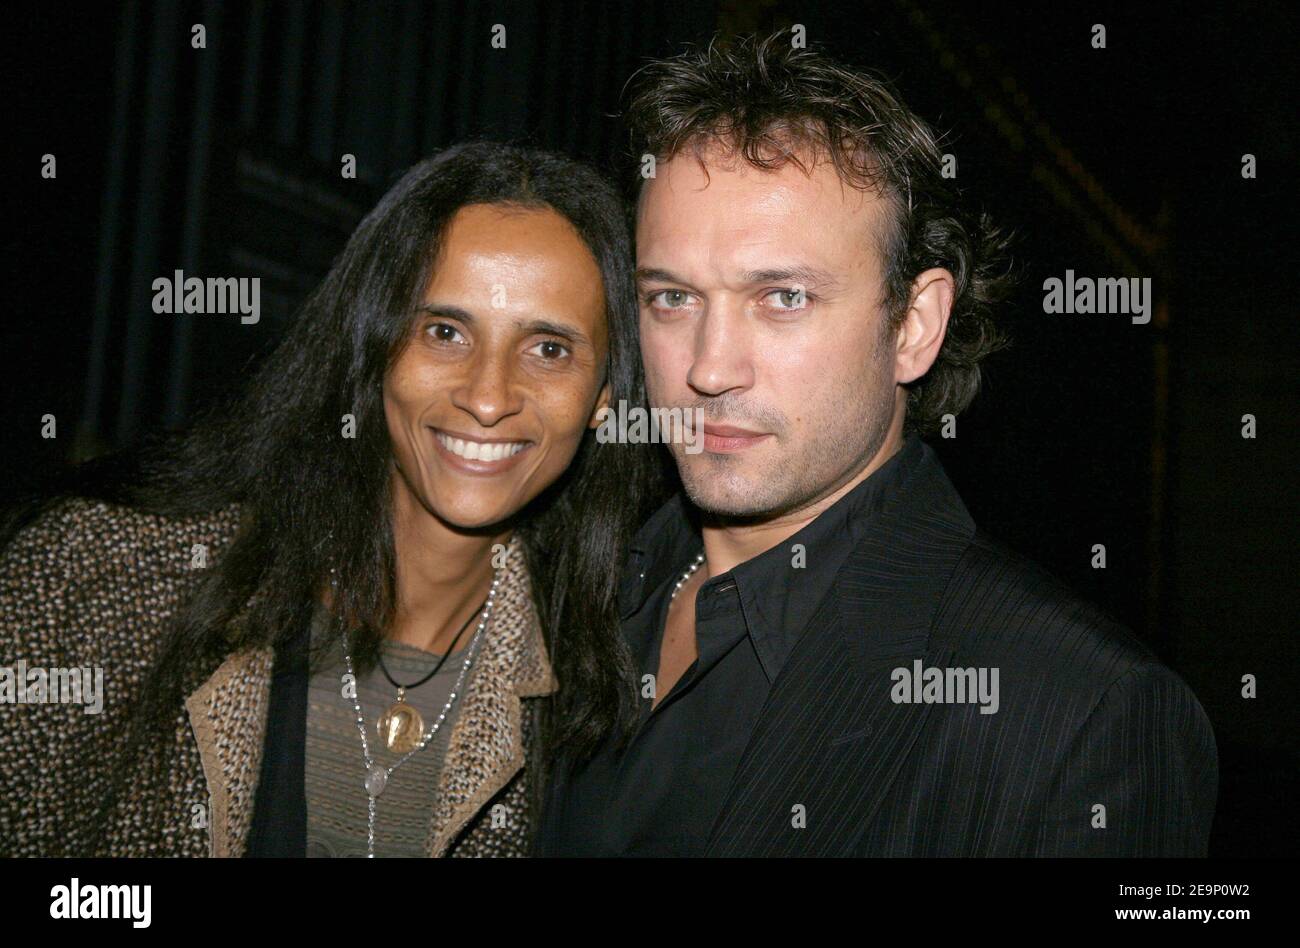 Swiss actor Vincent Perez and his wife Karine Sylla attend the 'Van Cleef and Arpels' party held at the Tuileries garden in Paris, France on October 20, 2006. Photo by Denis Guignebourg/ABACAPRESS.COM. Stock Photo